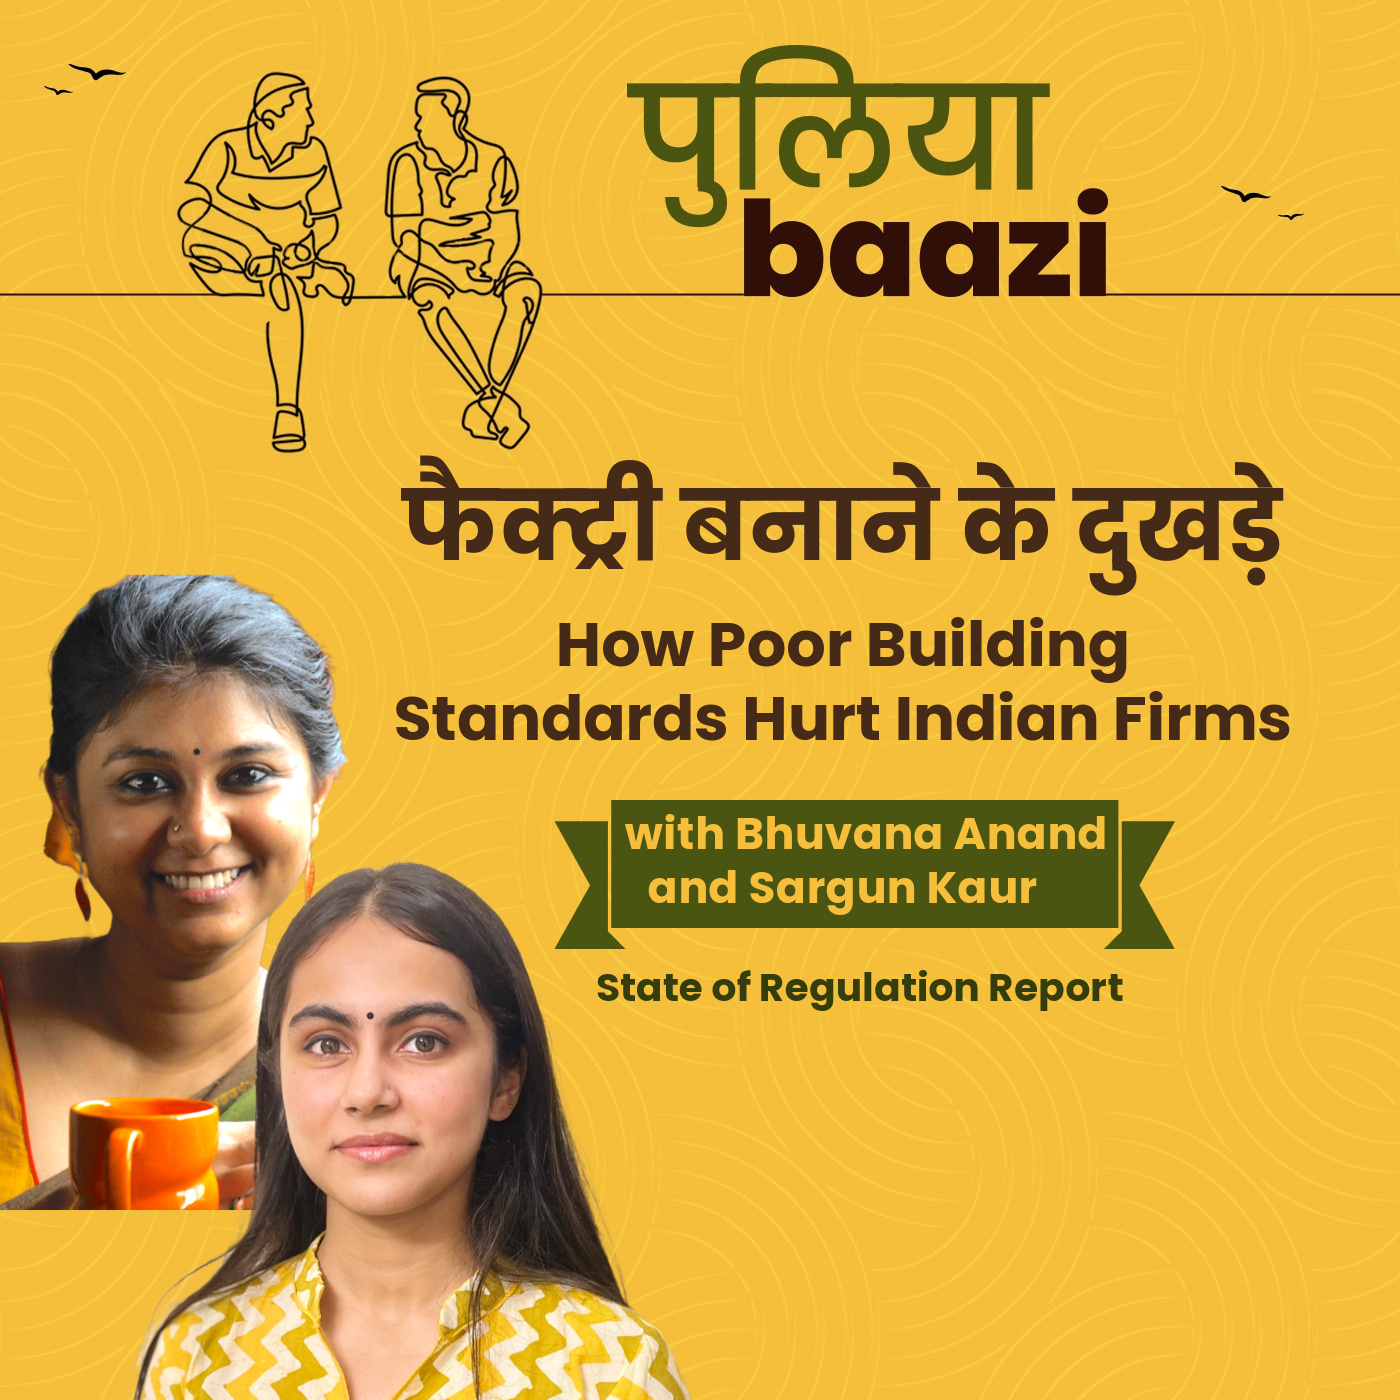 फैक्ट्री बनाने के दुखड़े। How Poor Building Standards Hurt Indian Firms ft. Bhuvana Anand and Sargun Kaur